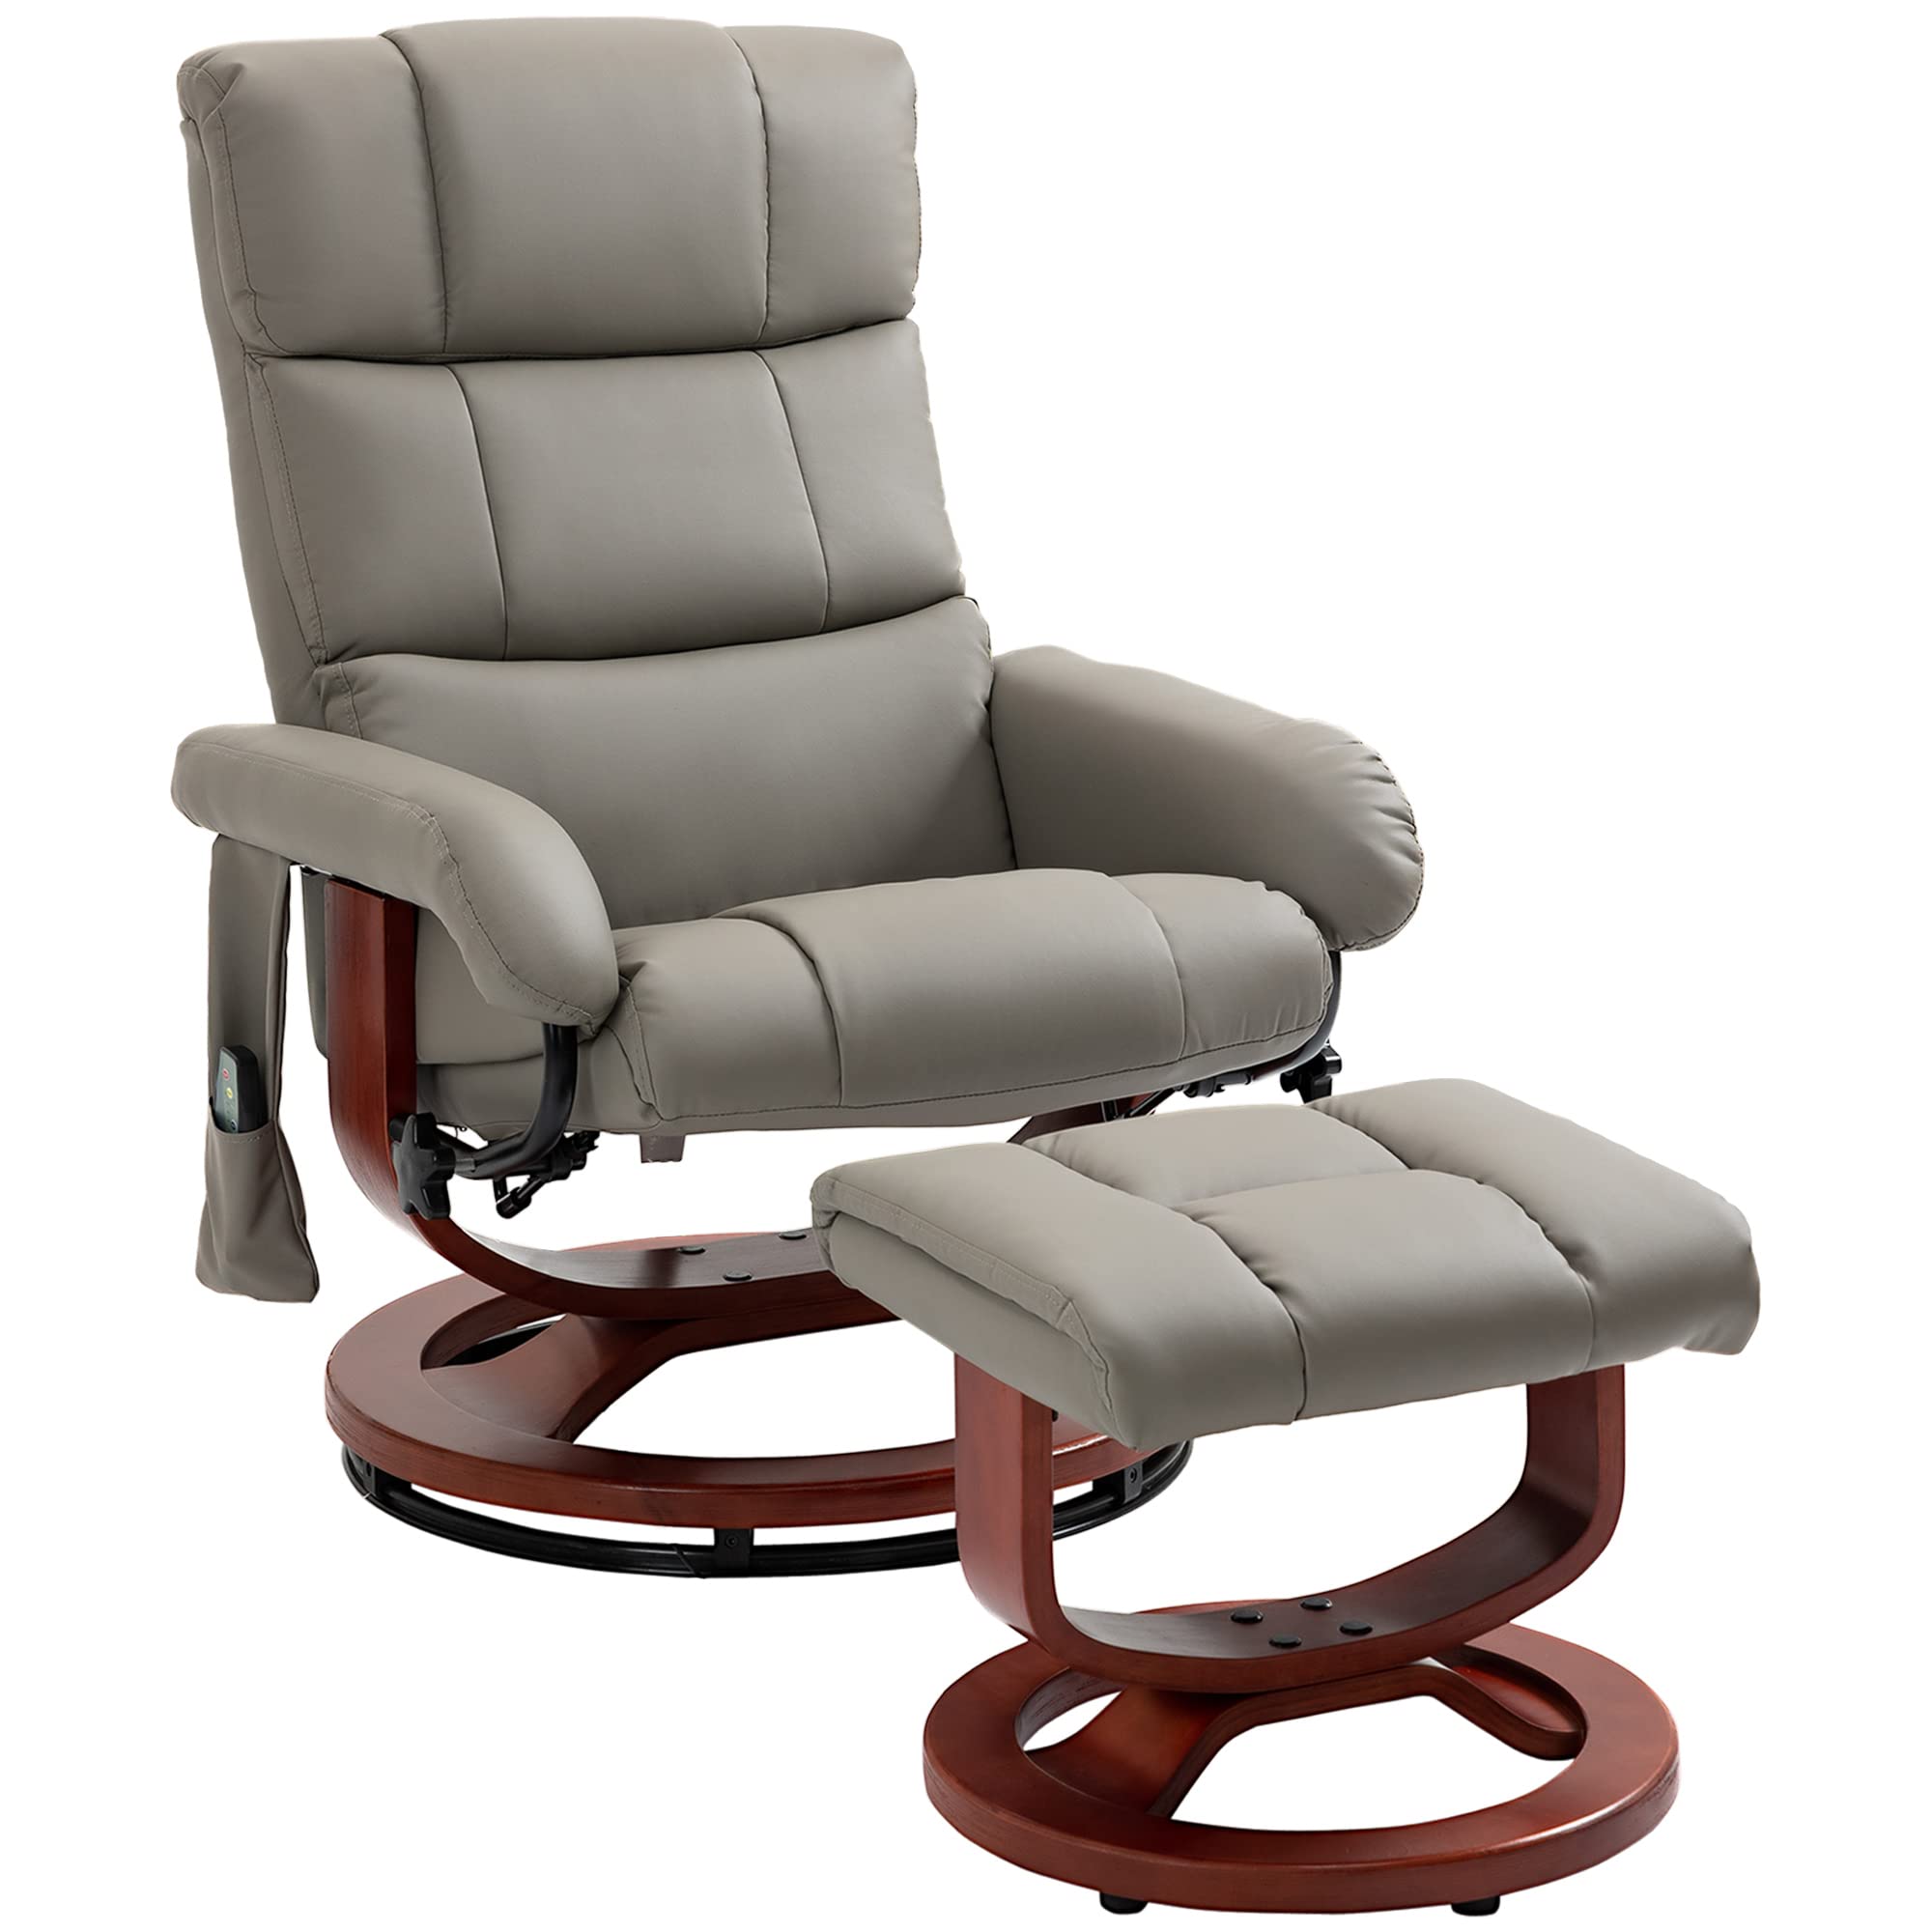 HOMcOM Recliner chair with Ottoman, Electric Faux Leather Recliner with 10 Vibration Points and 5 Massage Mode, Reclining chair 